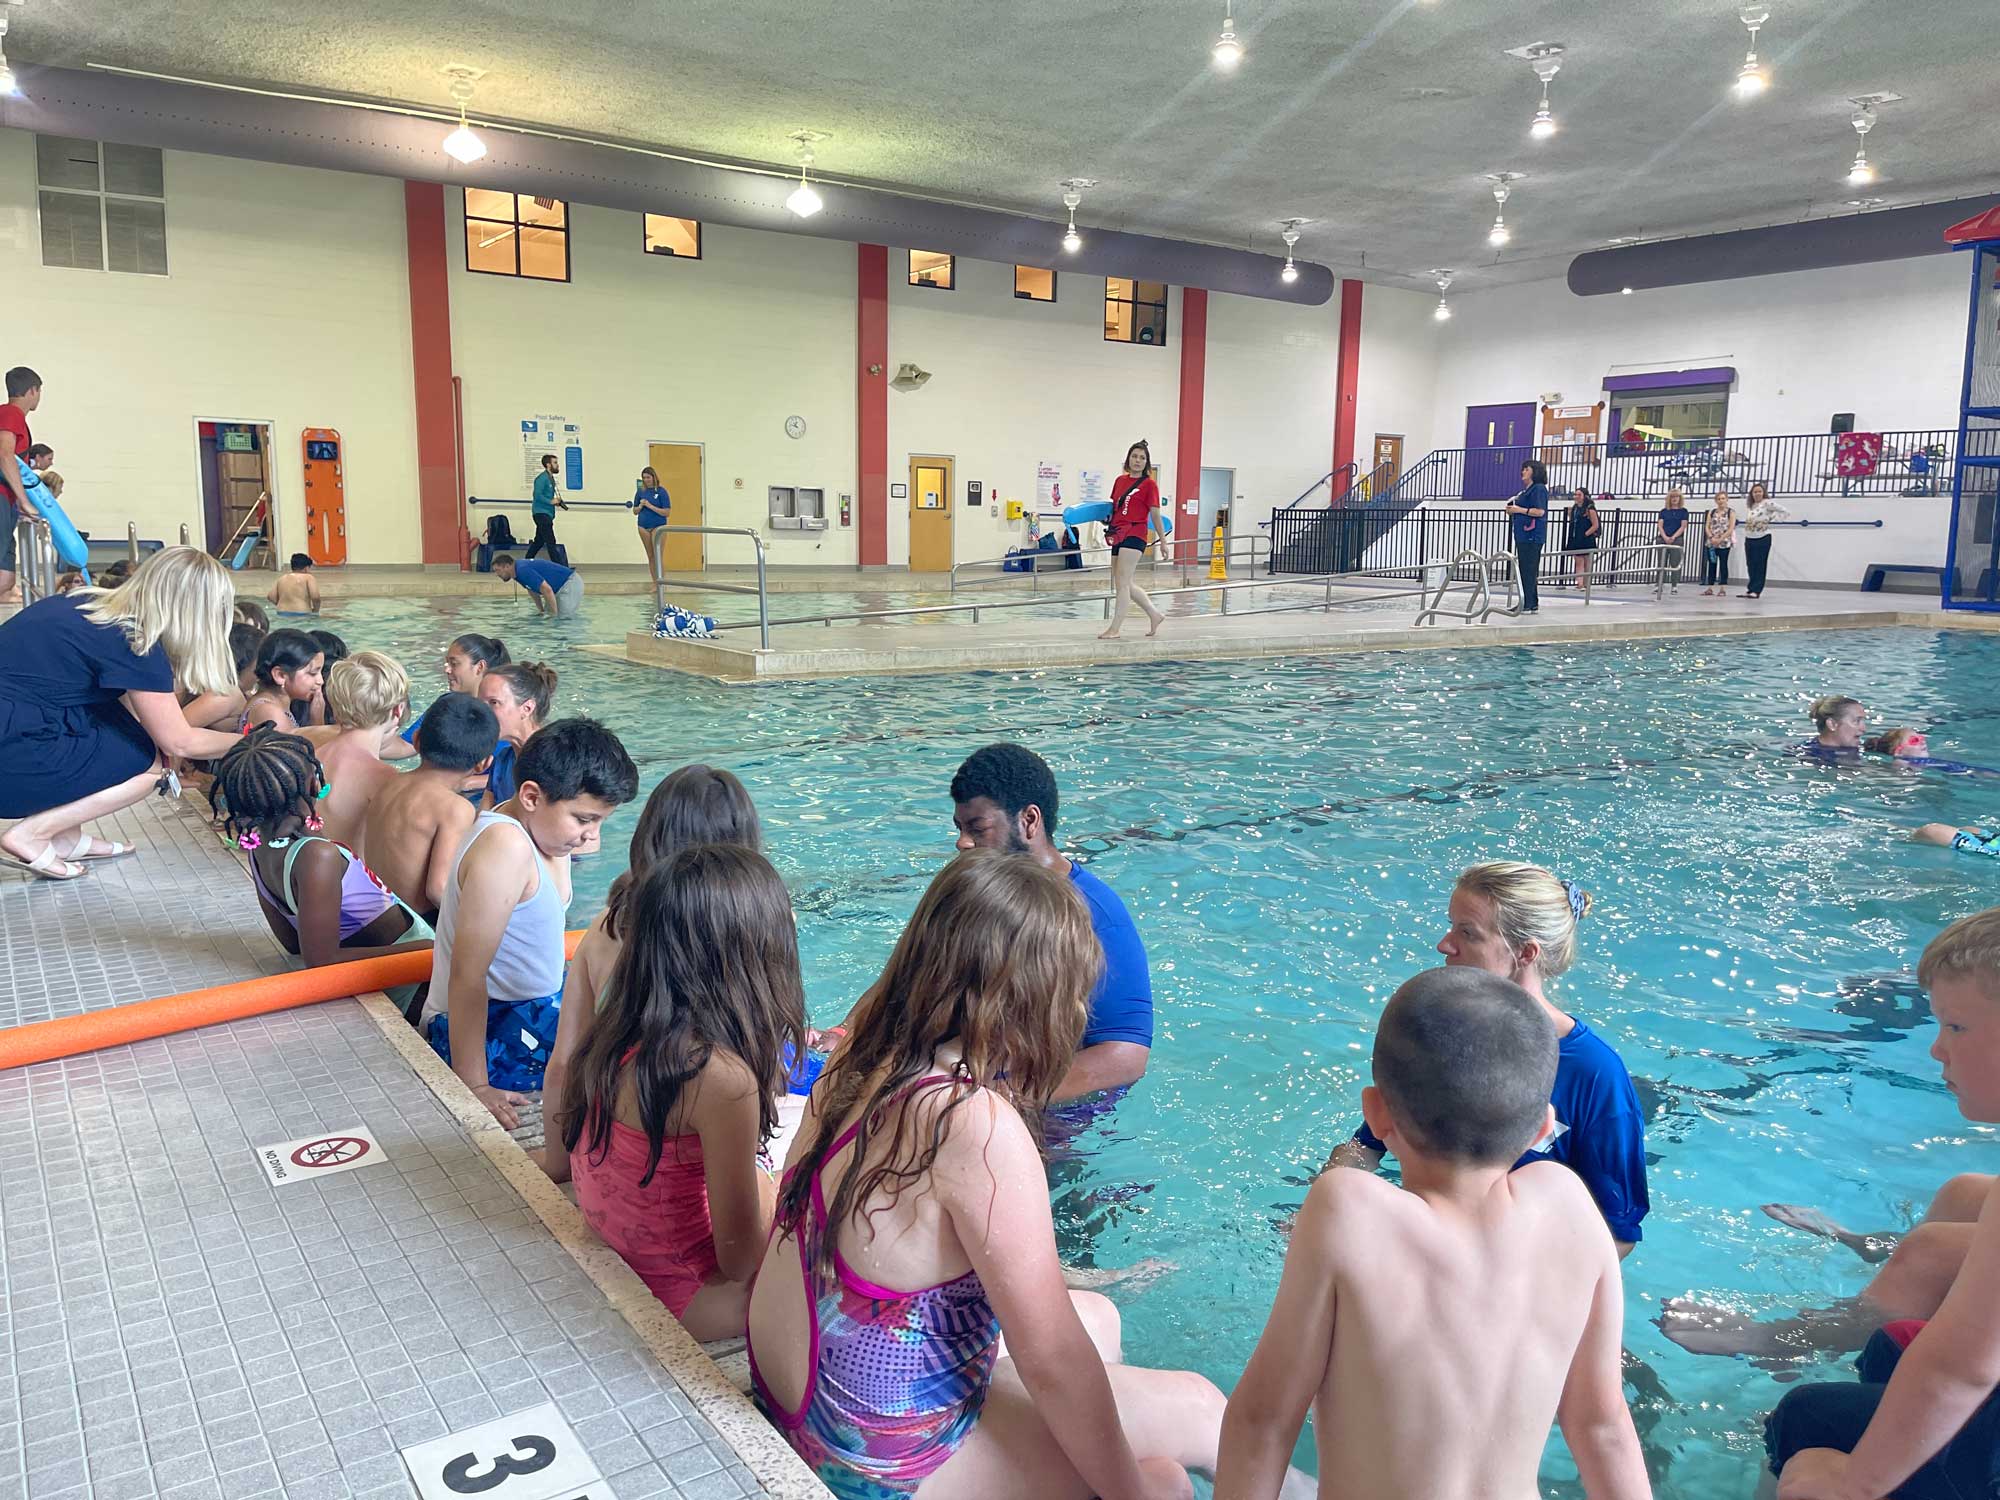 Swimming for good: Everett YMCA's lifeguard class uplifts at-risk kids